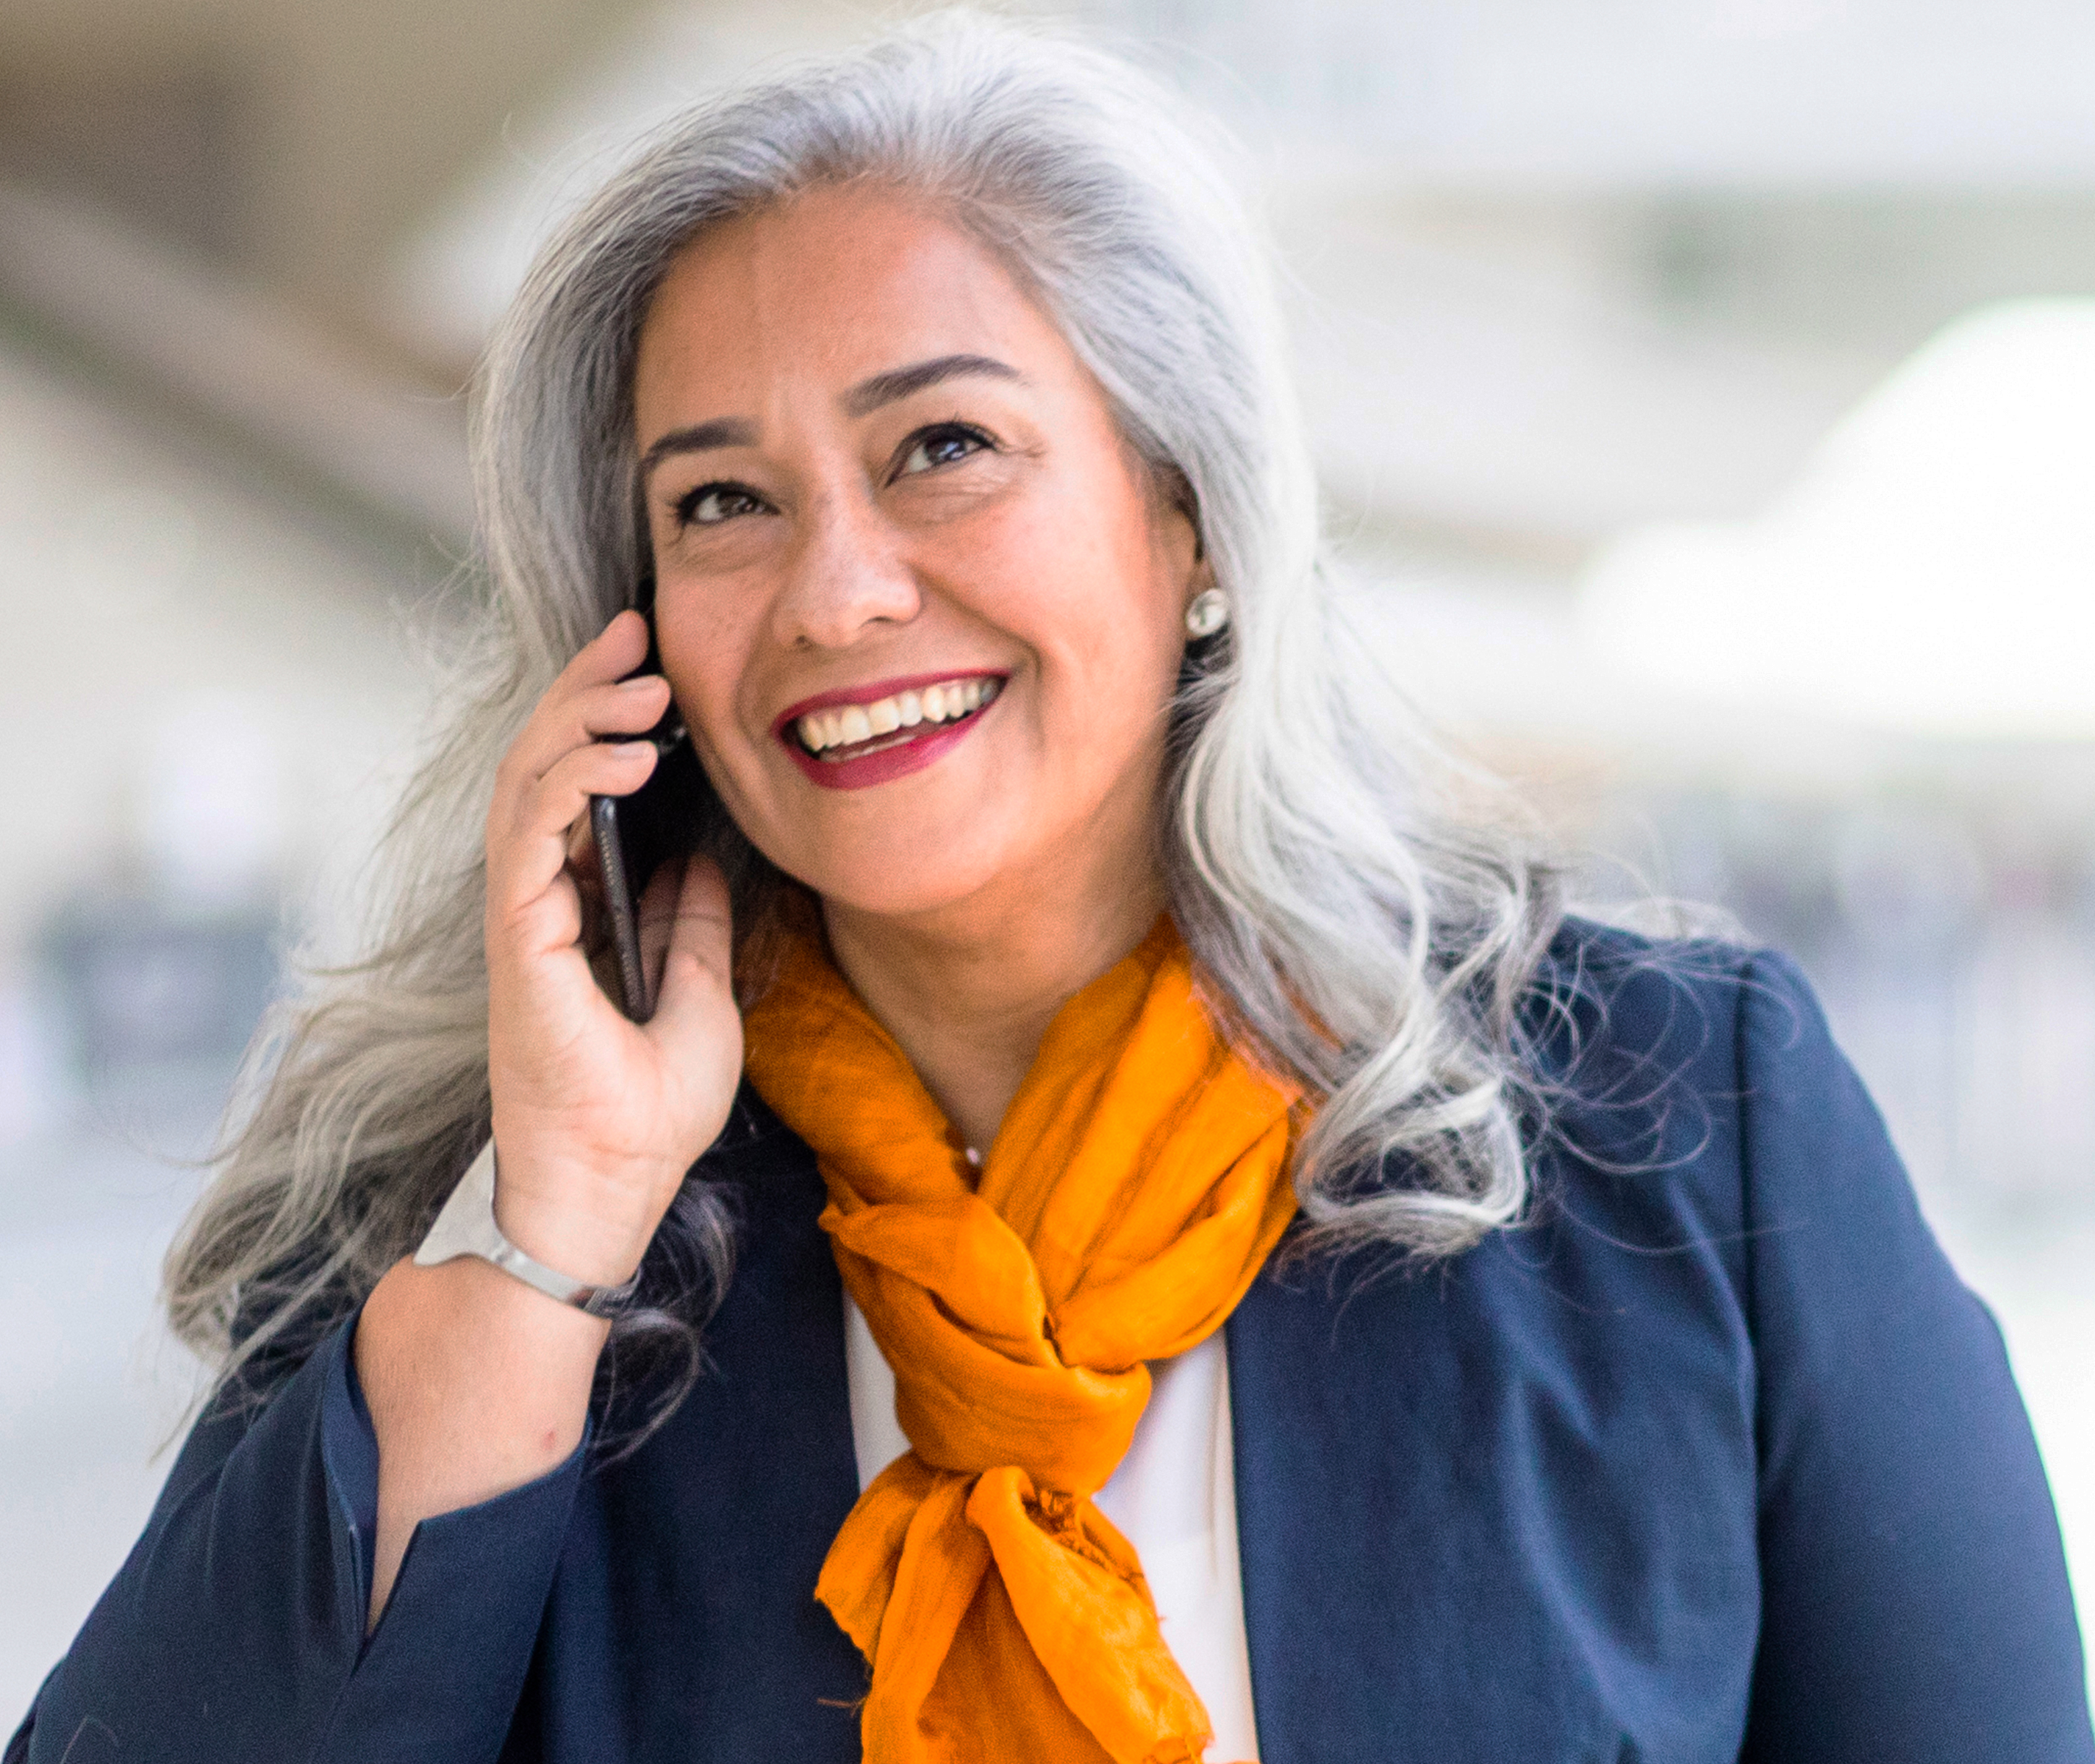 Smiling woman talking on a mobile phone